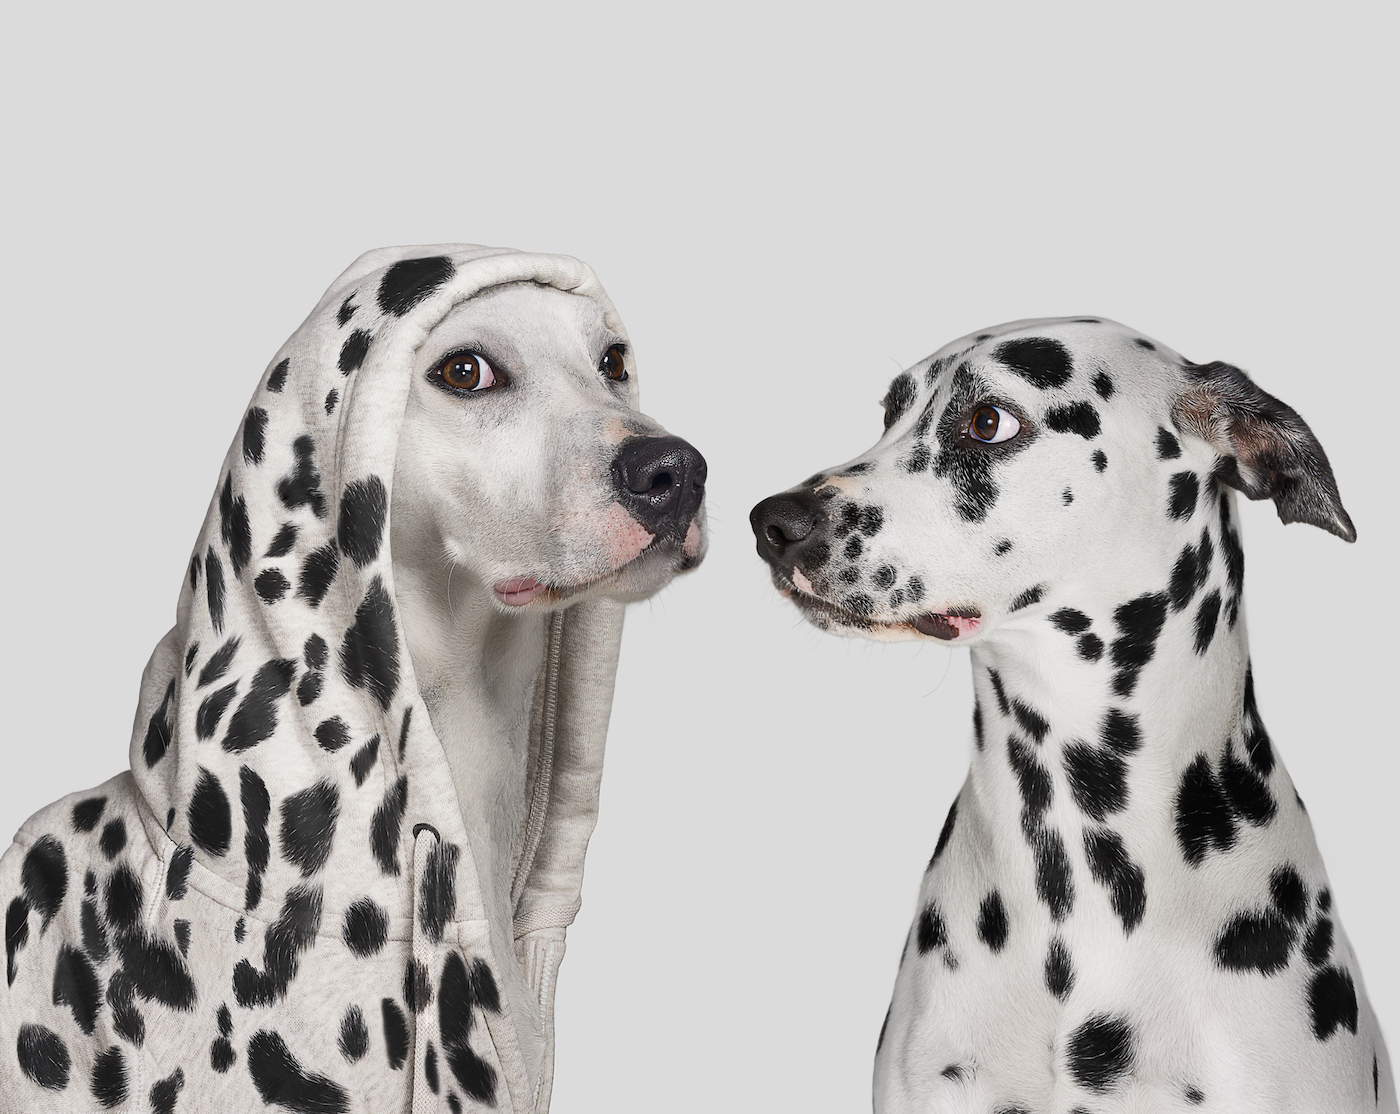 Dalmatian dog surprised by a white dog wearing a hoodie with spots, pretending to be a Dalmatian